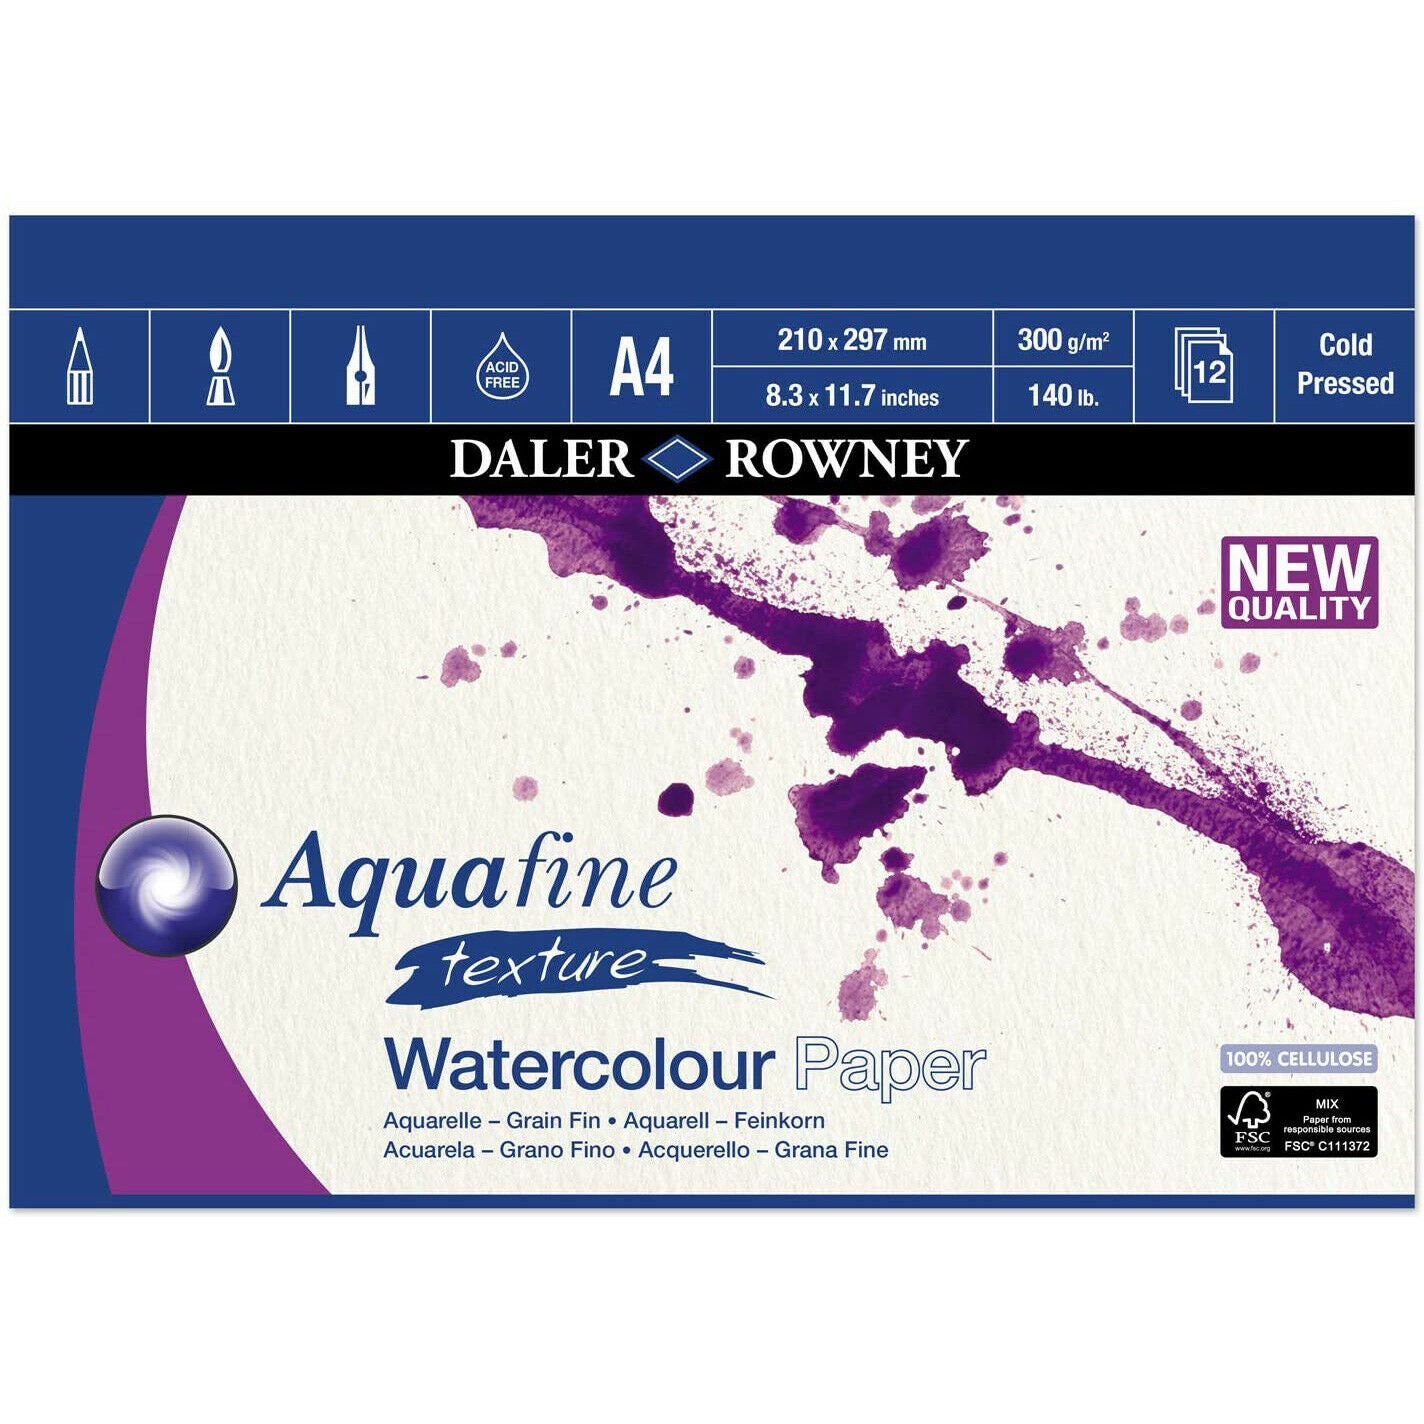 Daler-Rowney Aquafine Watercolour Paper Pads 12 Sheets - COLD PRESSED